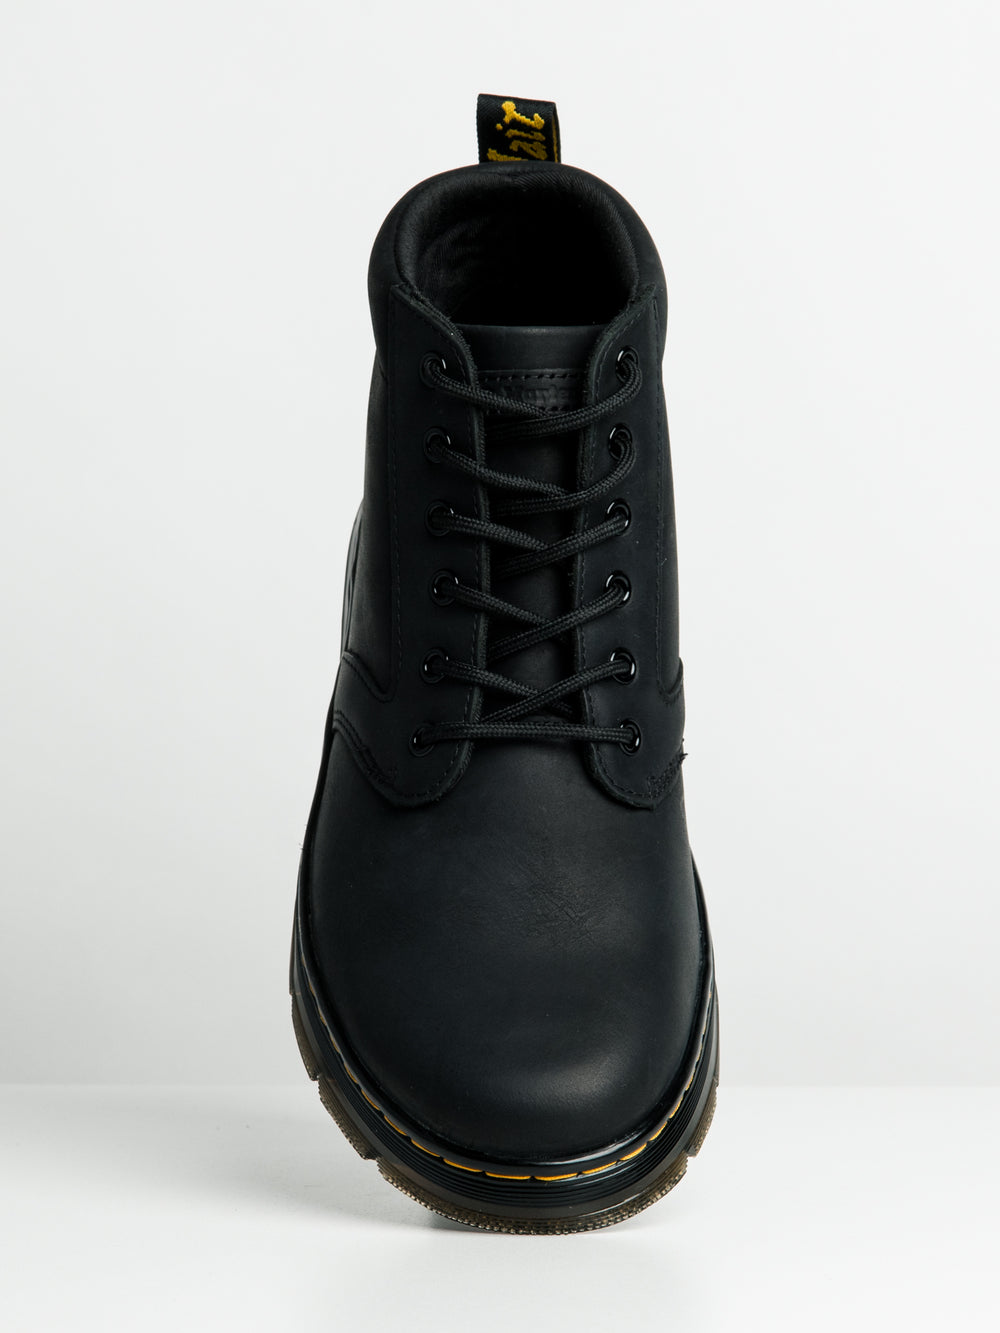 MENS DR MARTENS BONNY LEATHER WYOMING BOOT - CLEARANCE